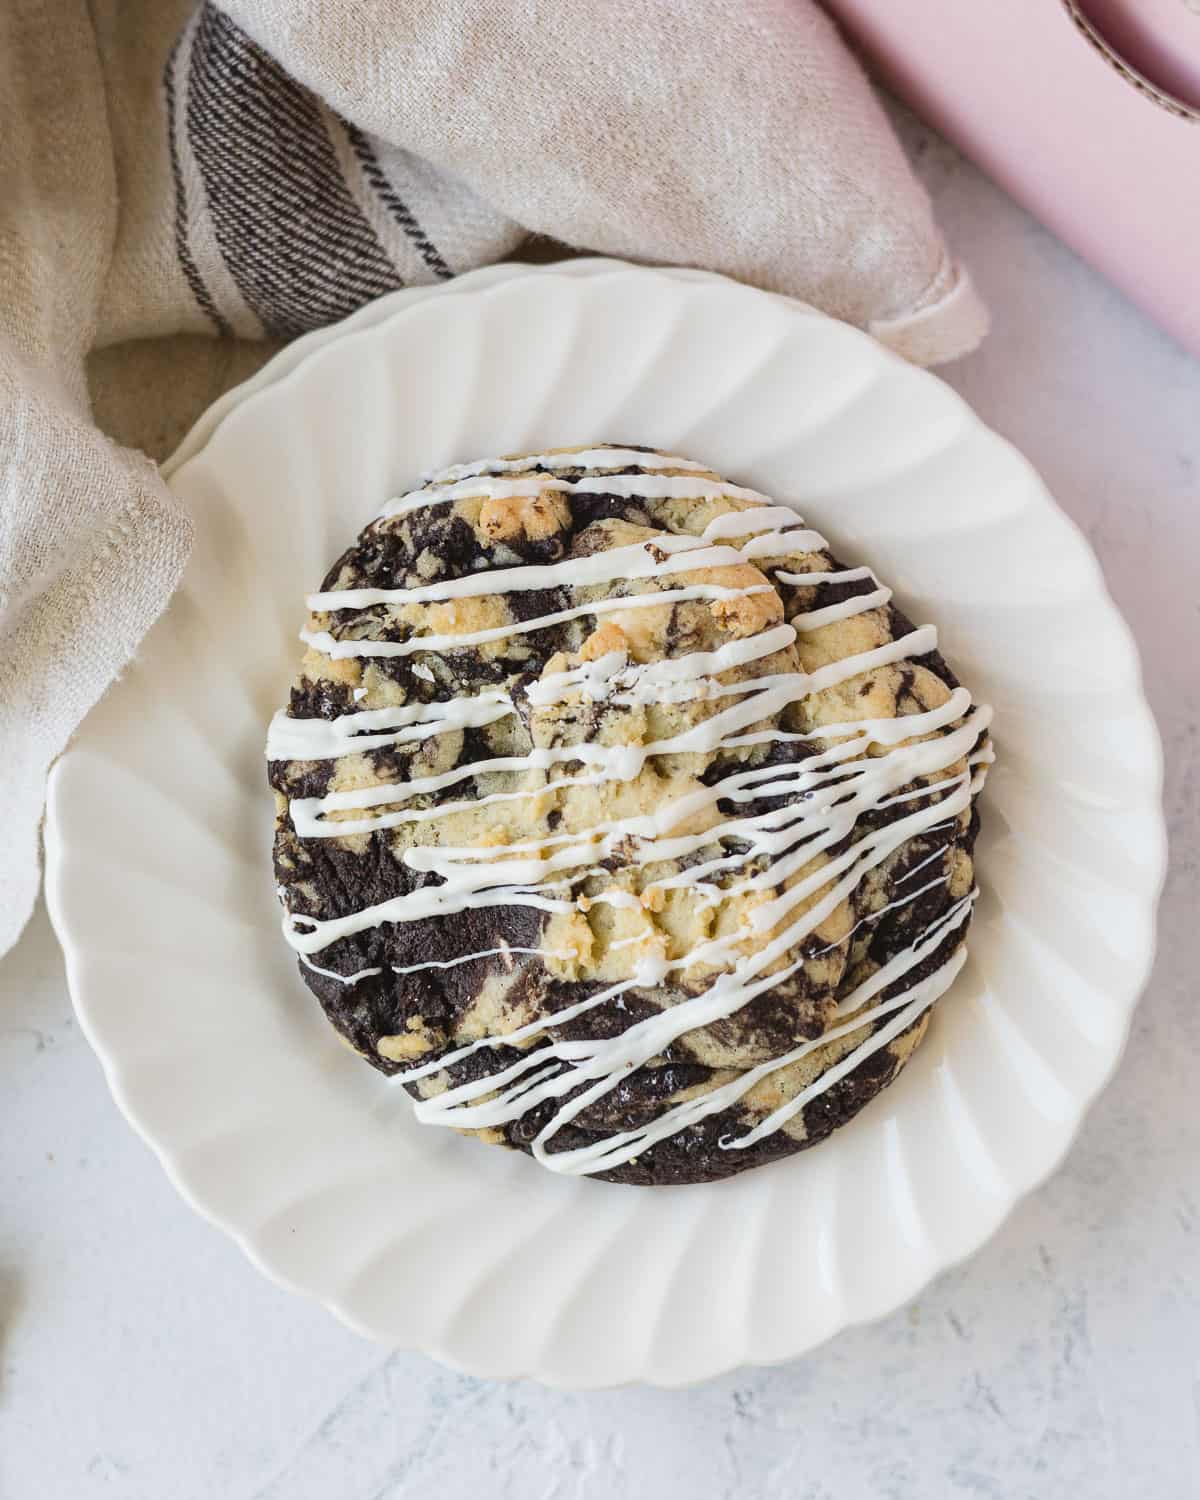 A Crumbl cookies and cream cookie with chocolate drizzle on a plate.